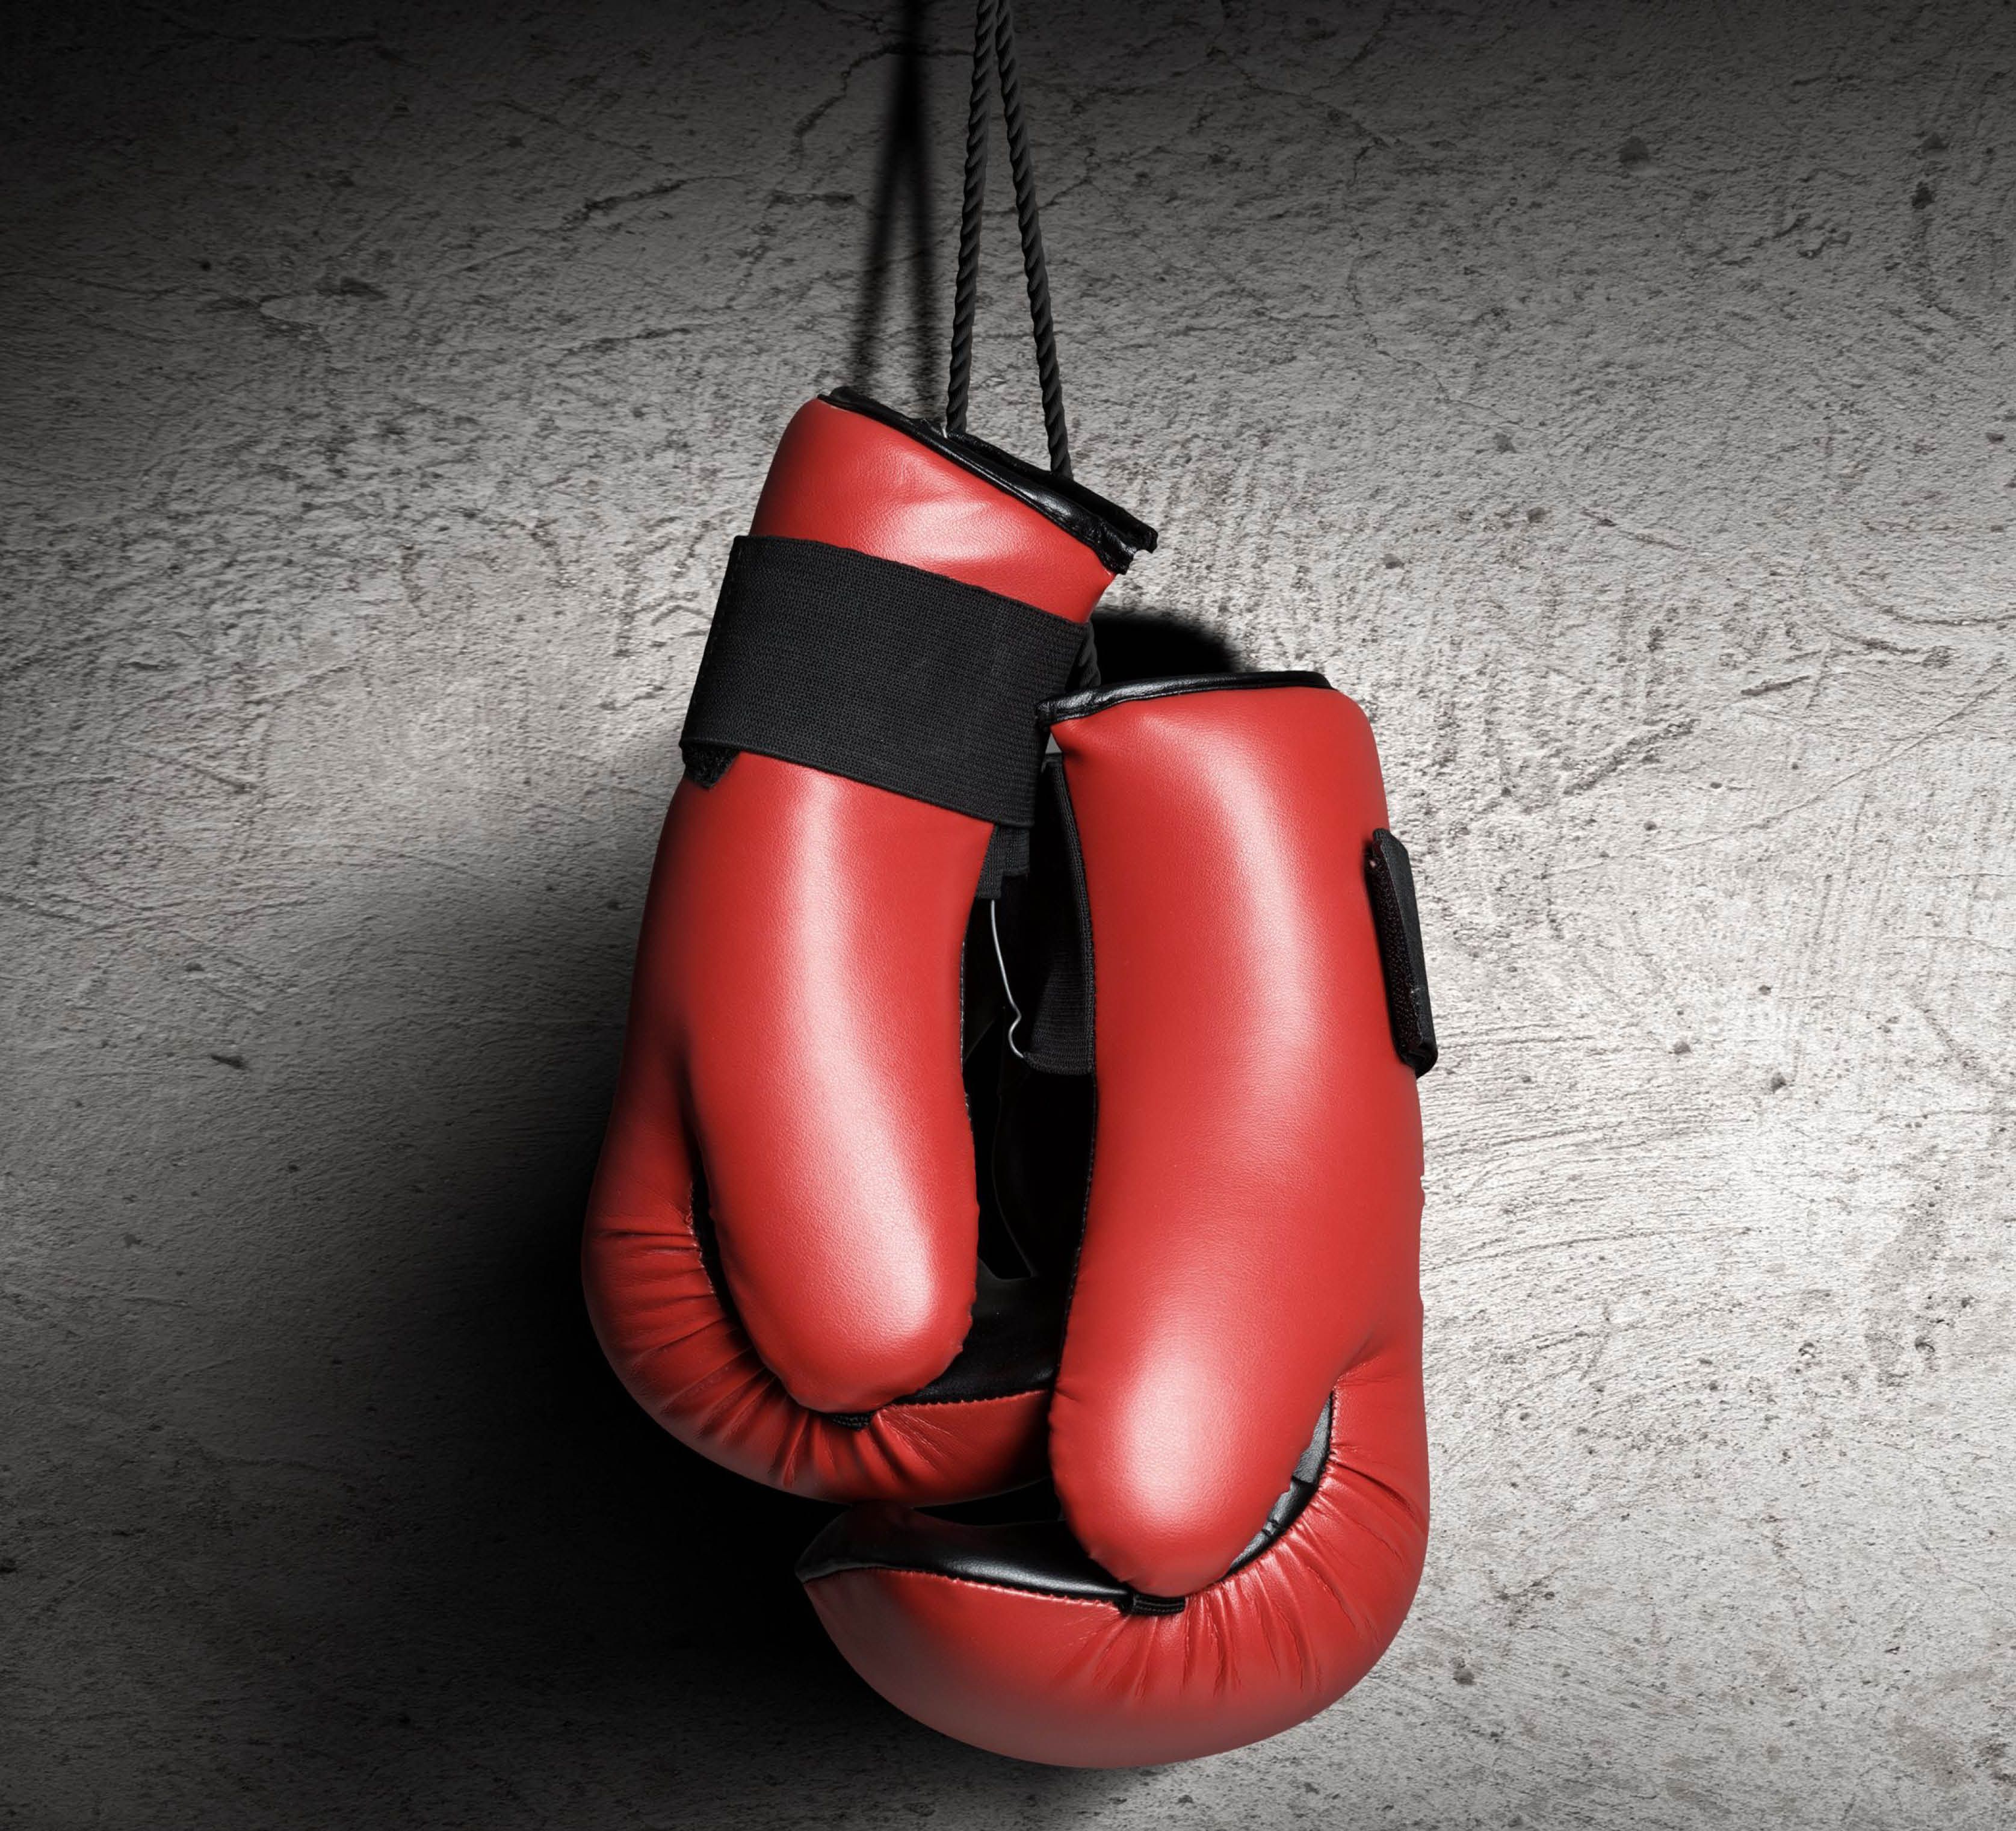 1242x2688px  free download  HD wallpaper man facing heavy bag holding  training gloves boxer boxing sport  Wallpaper Flare